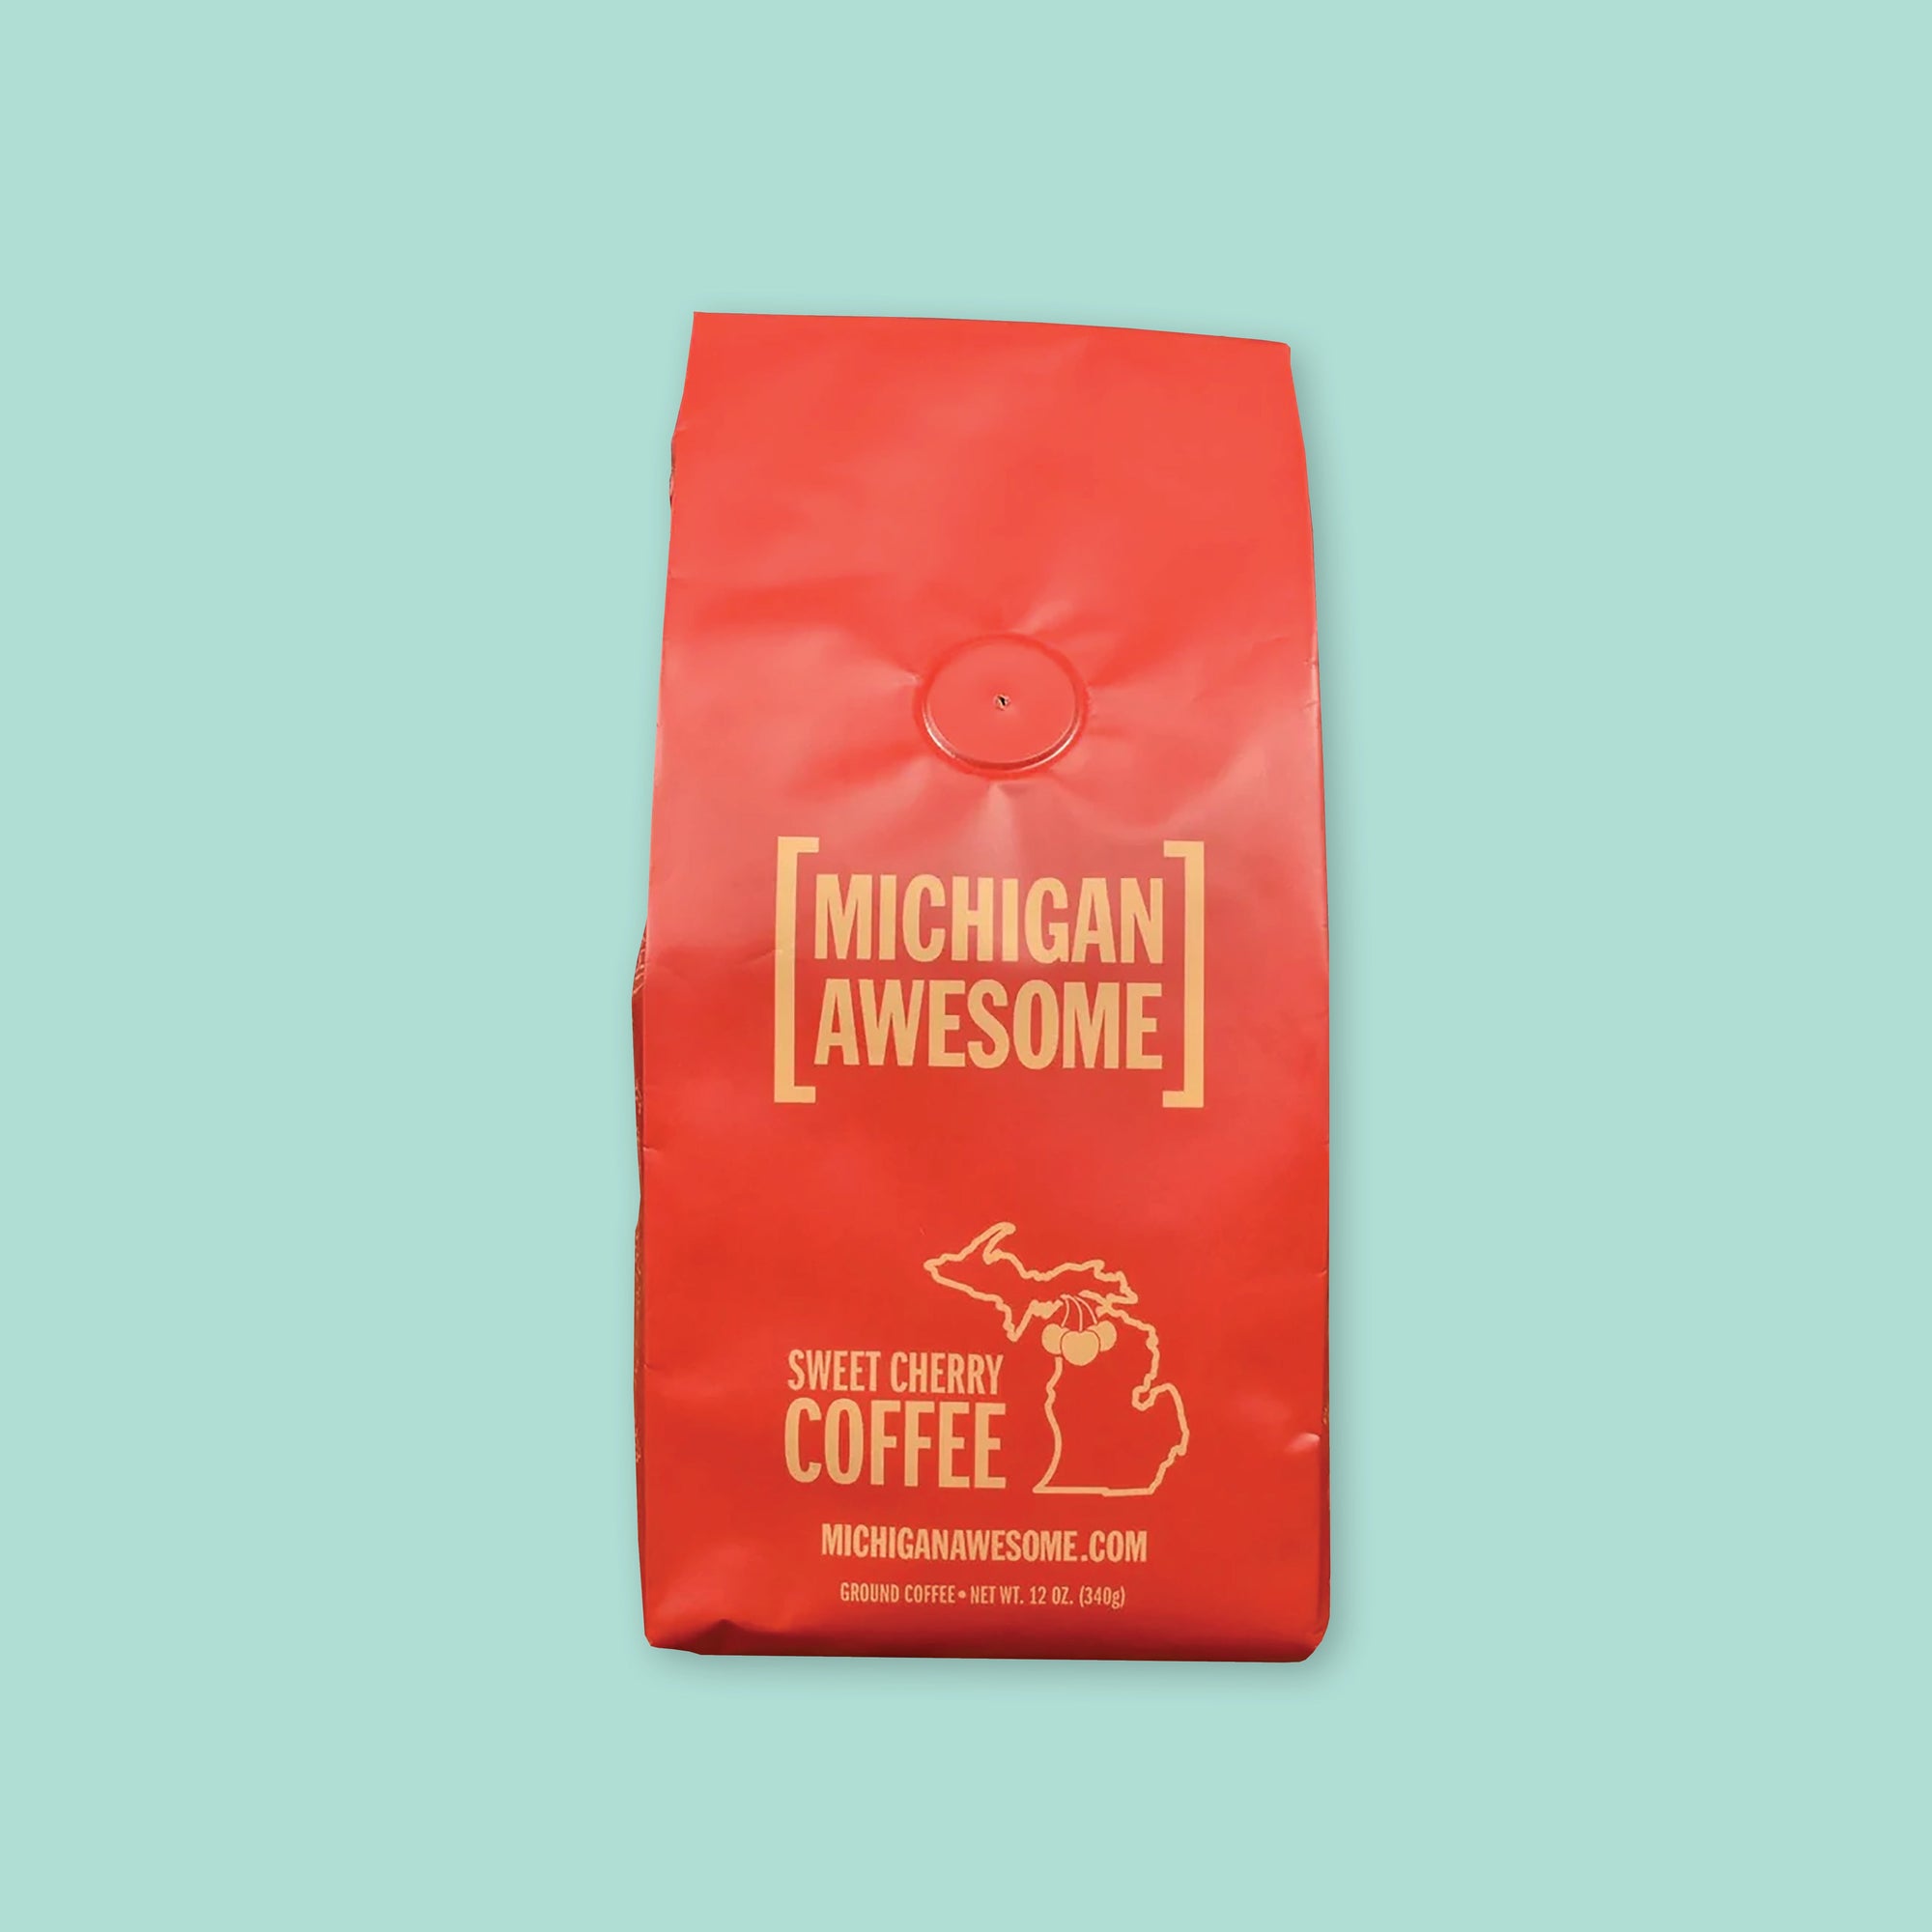 On a mint green background is a red bag of coffee. The coffee is Michigan Awesome brand Sweet Cherry Ground Coffee. 12 oz (350 g)